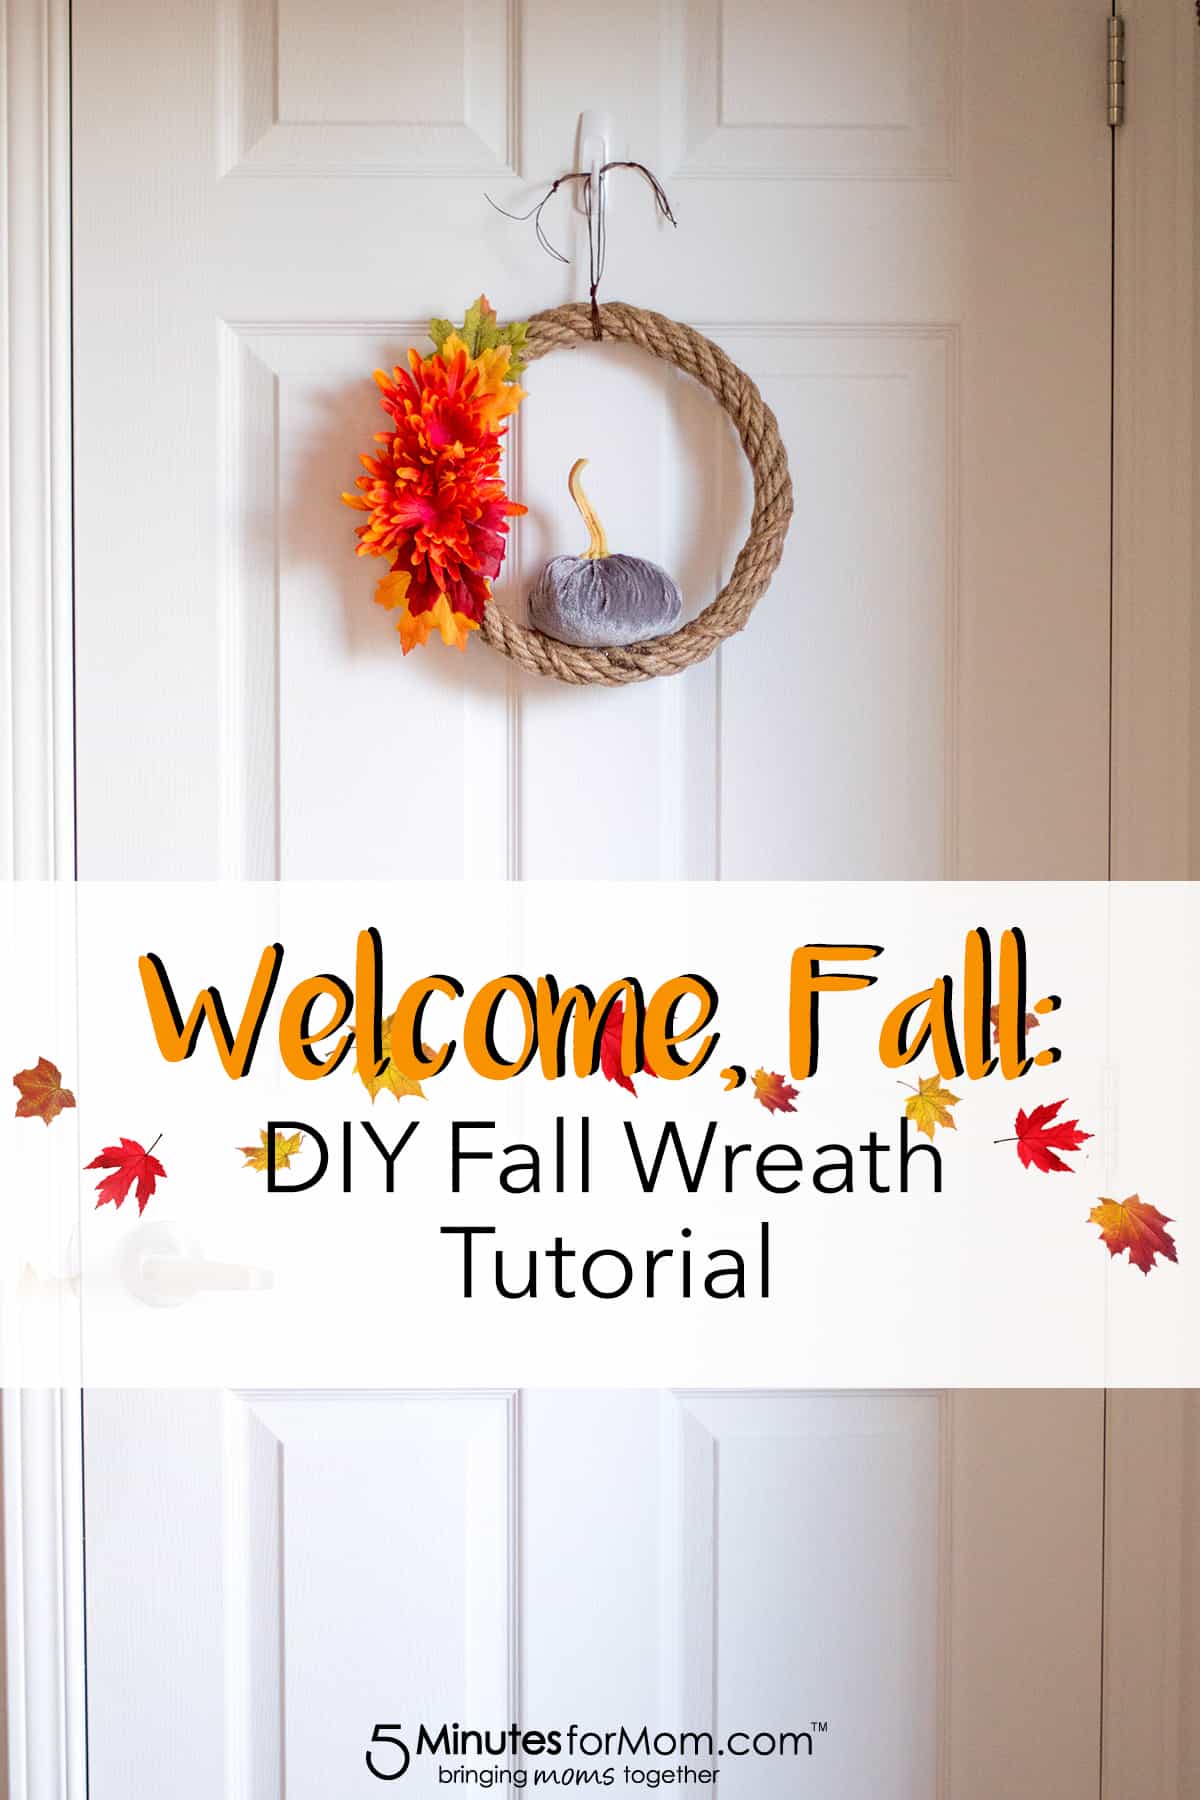 Doing Autumn the right way: spruce up your home with this elegant, simple, cost-effective DIY Fall Wreath.